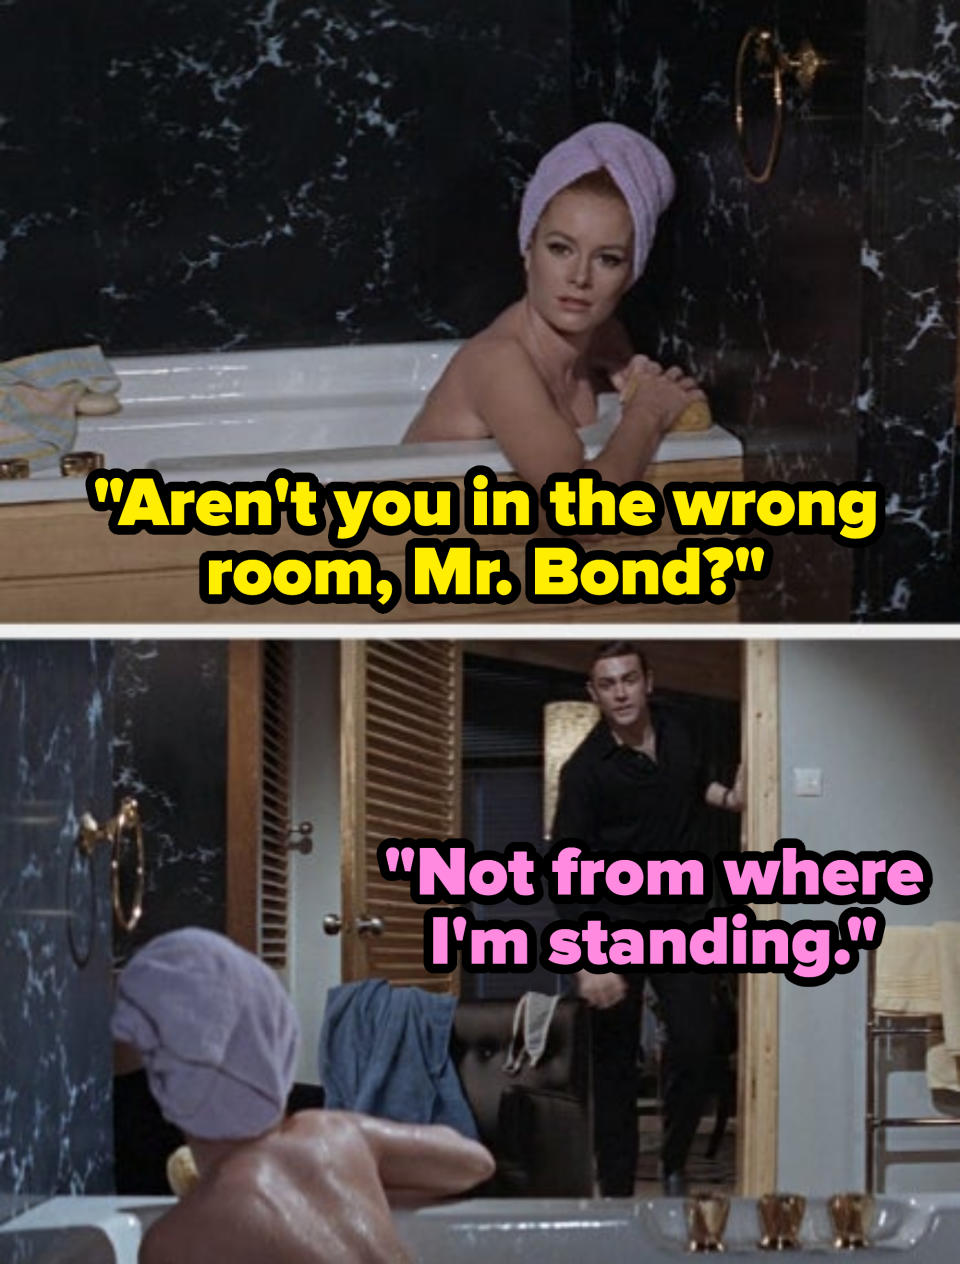 woman in the tub: aren't you in the wrong room, mr bond? Bond: not from where i'm standing